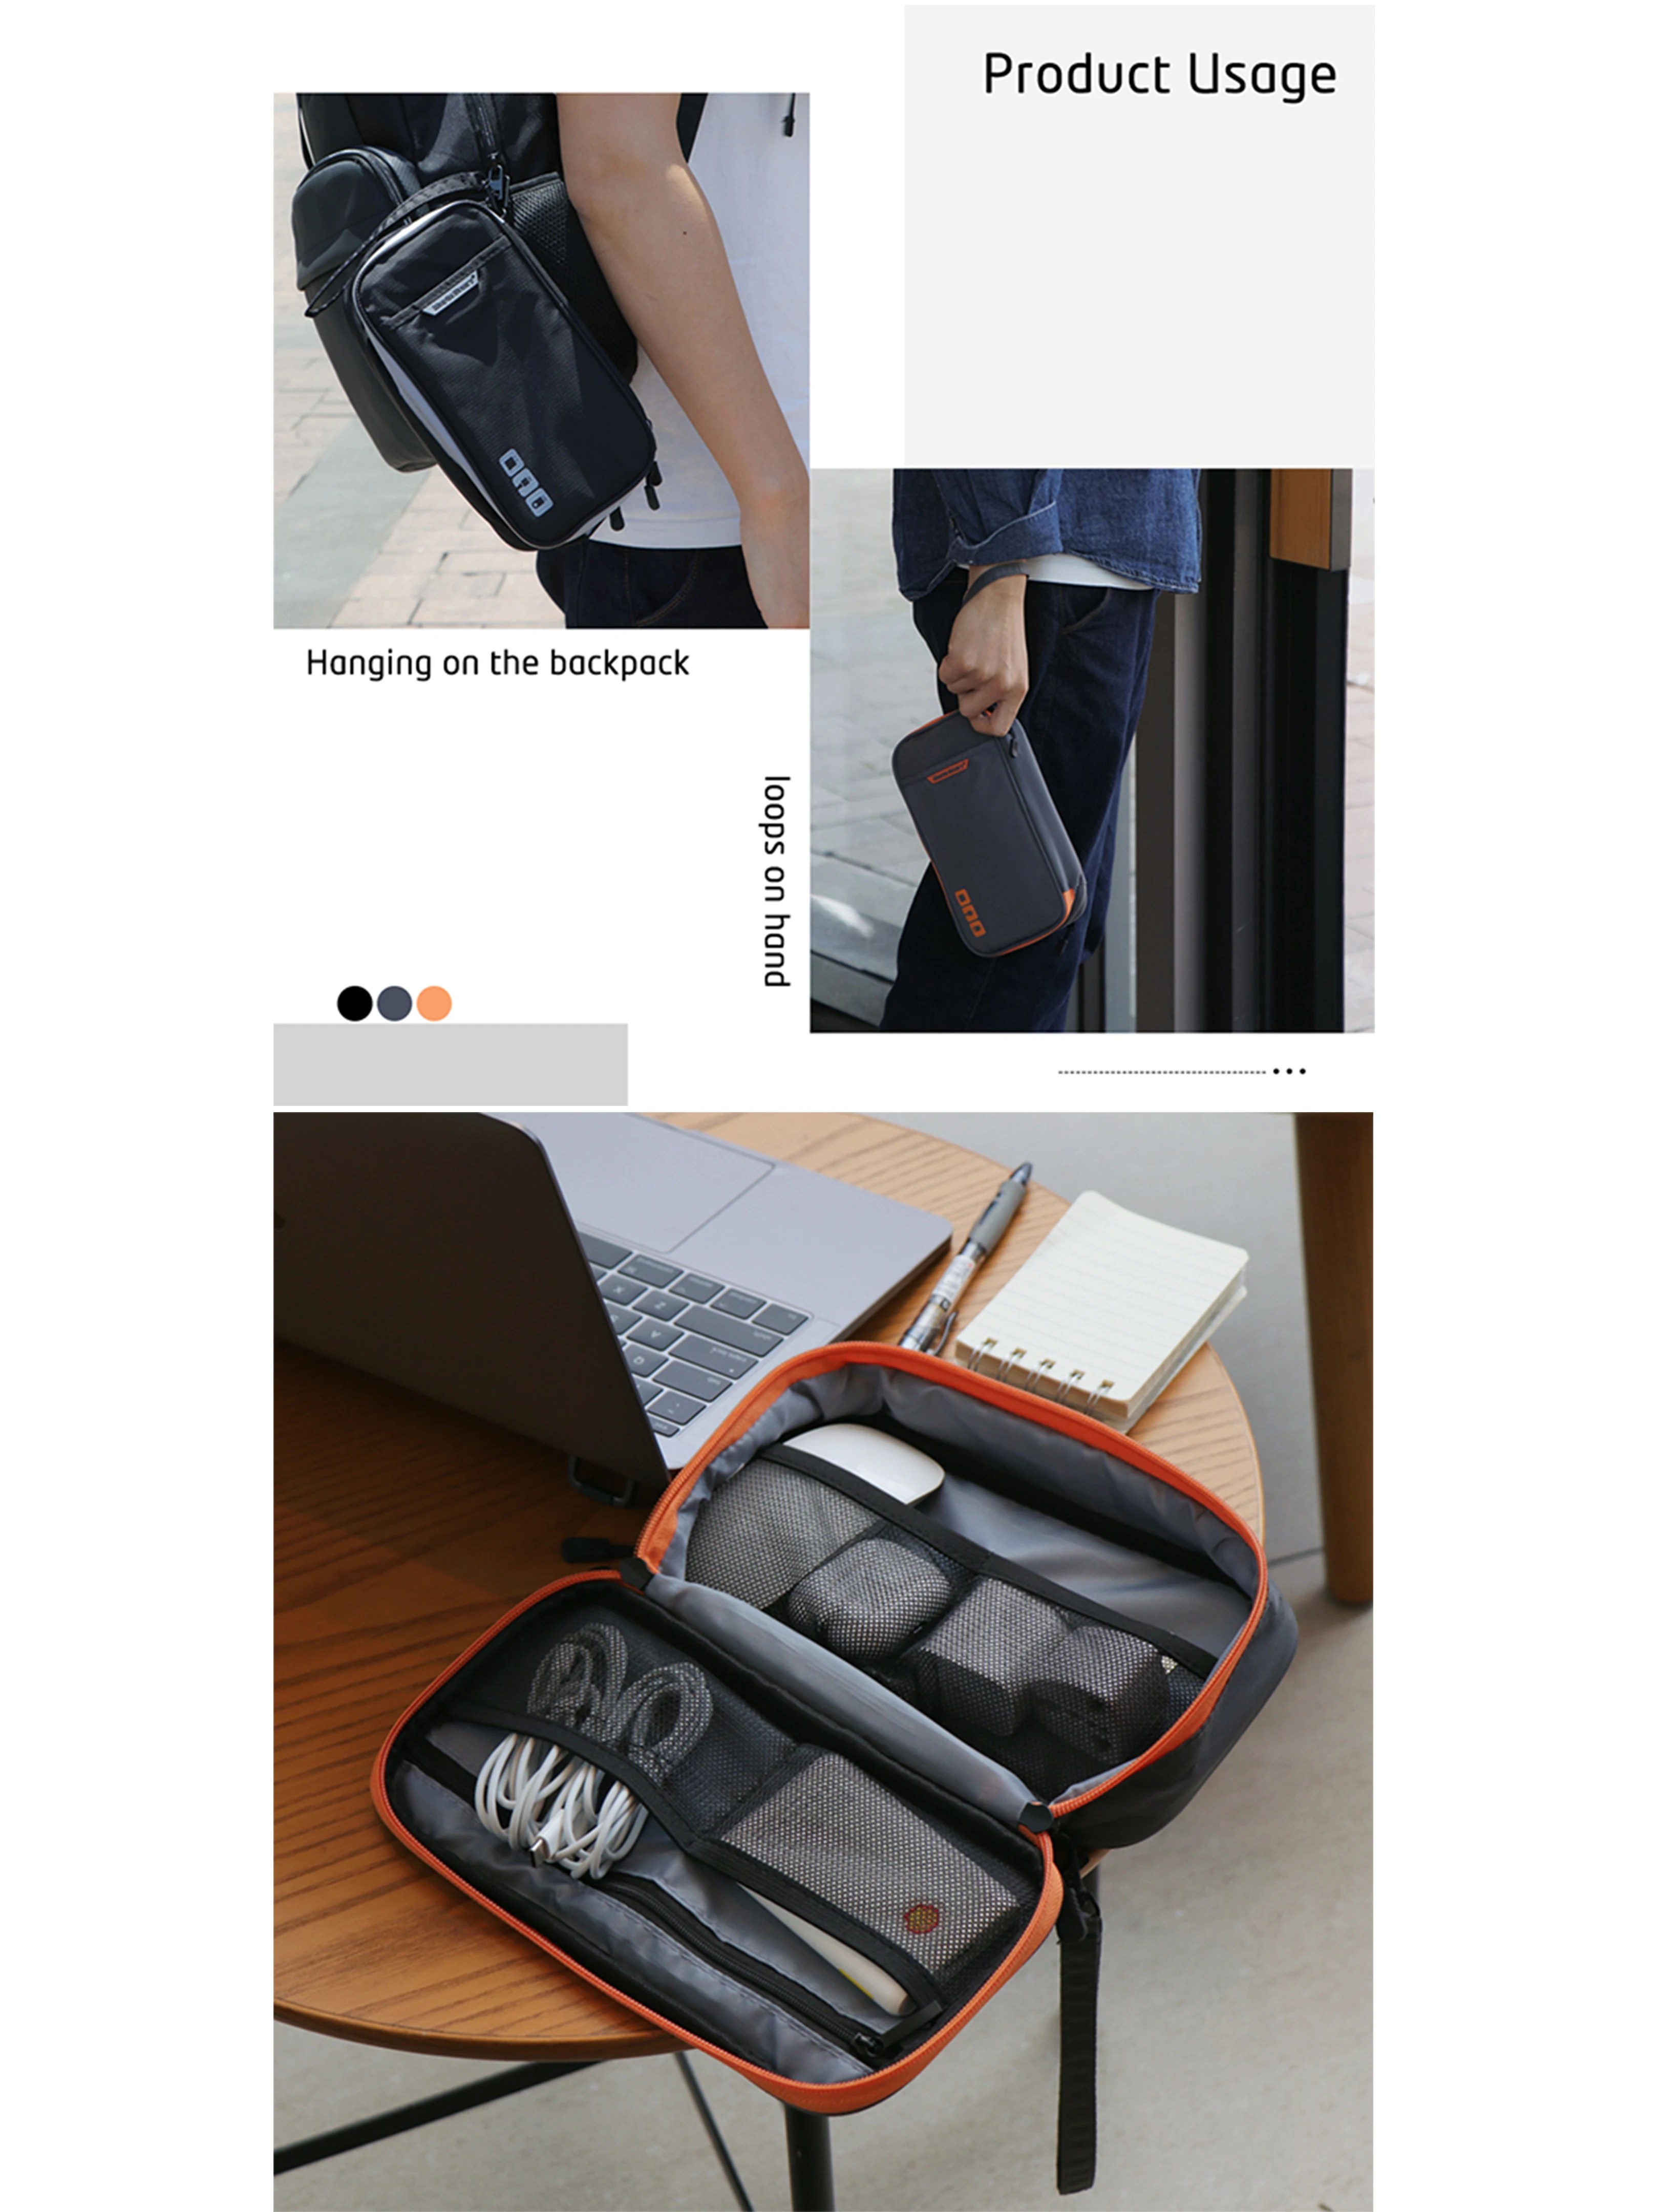 Portable Electronic Accessories Travel case,Cable Organizer Bag Gadget  Carry Bag for iPad,Cables,Power,USB Flash Drive, Charger - AliExpress